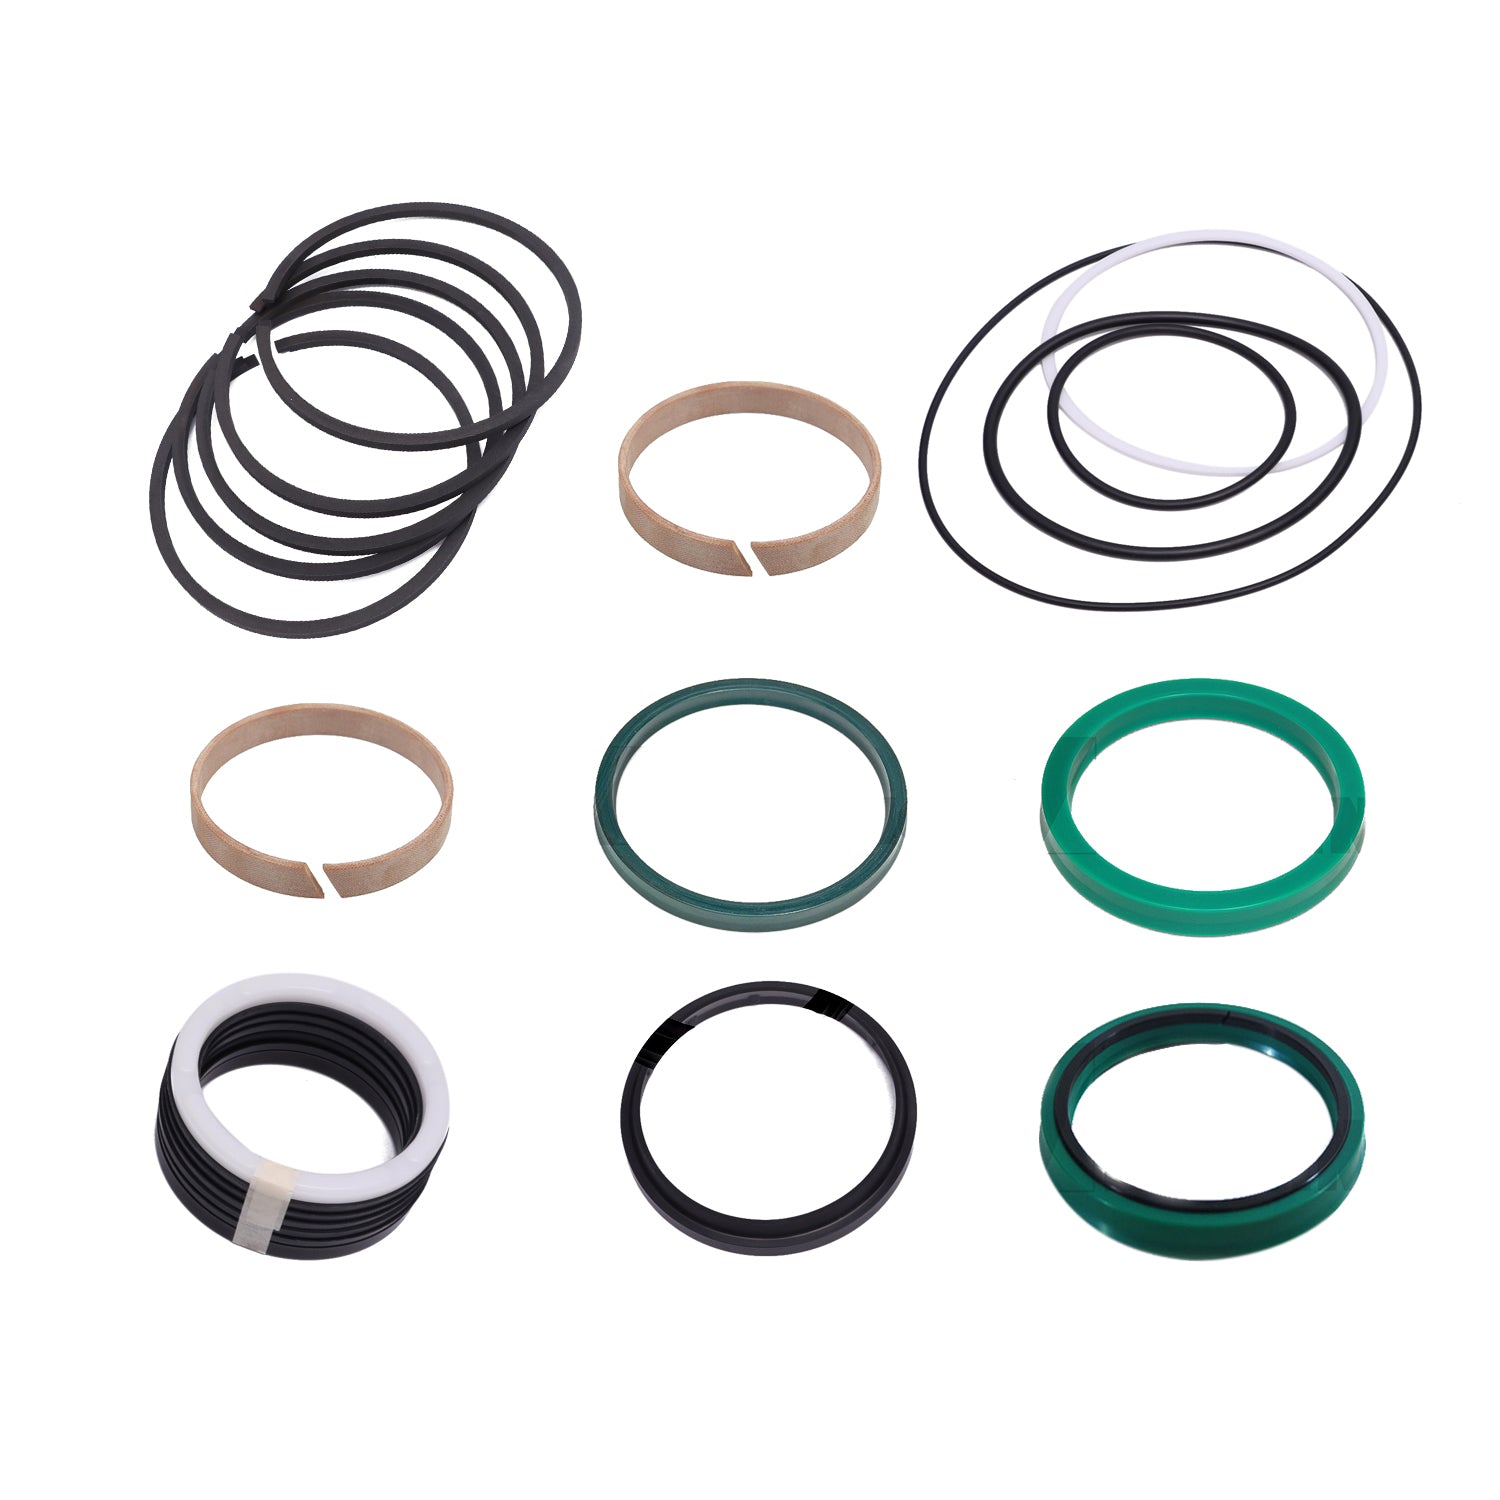 Differential Cylinder 10176356 (DN 110/75) Seal Kit for Schwing Stationary Concrete Pump, Hydraulic Main Oil Cylinder Sealing Kit for Schwing Stetter Concrete Pump - KUDUPARTS